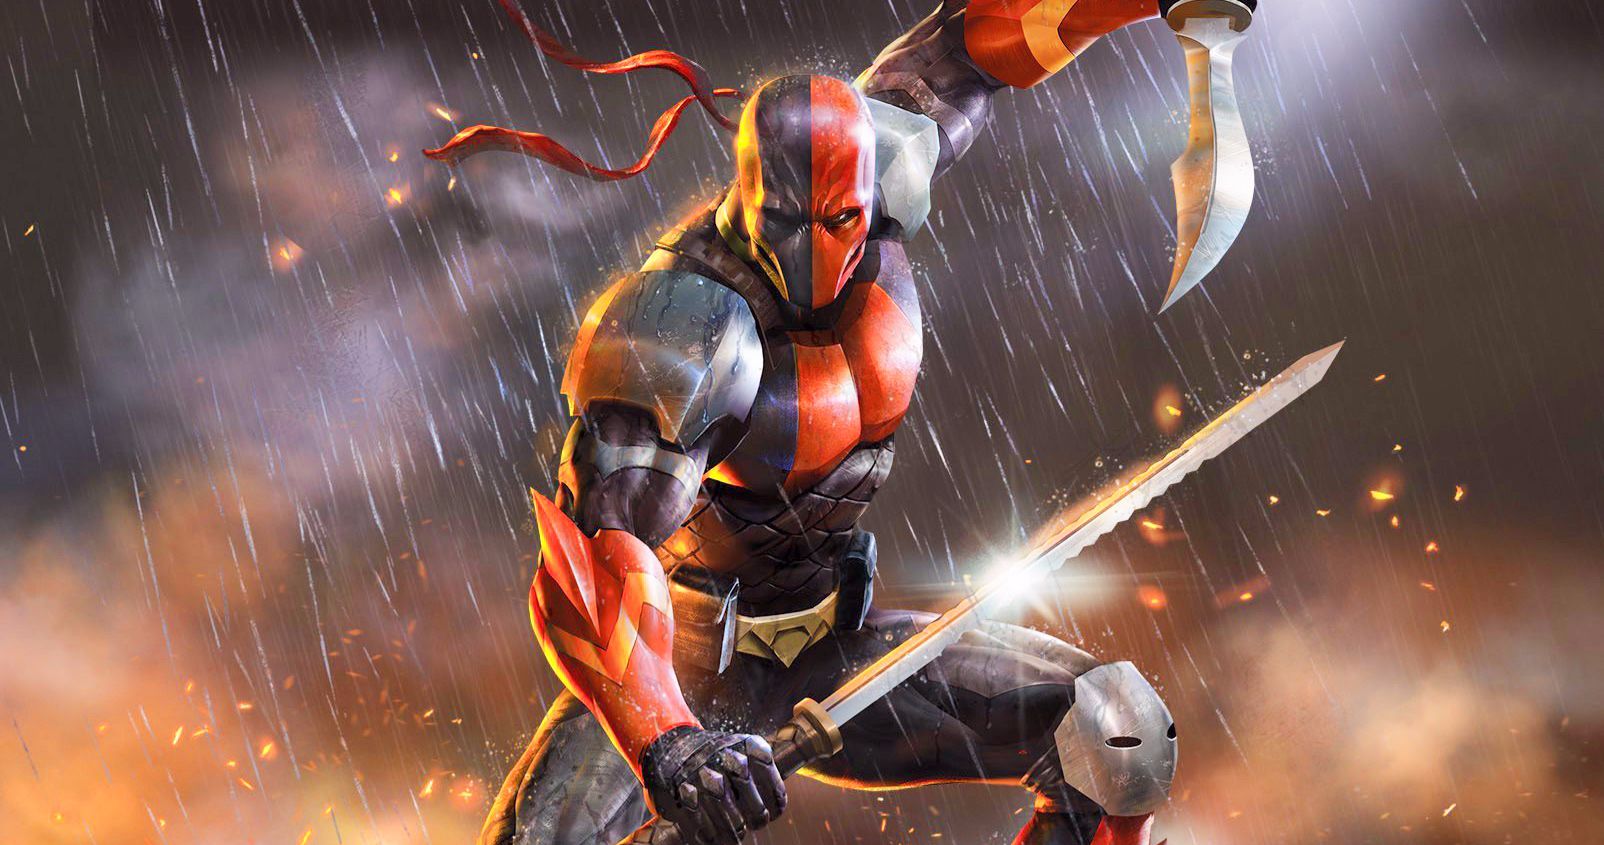 Deathstroke Knights &amp; Dragons: The Movie Review: DC Villain Gets a Bloody, Melodramatic Makeover